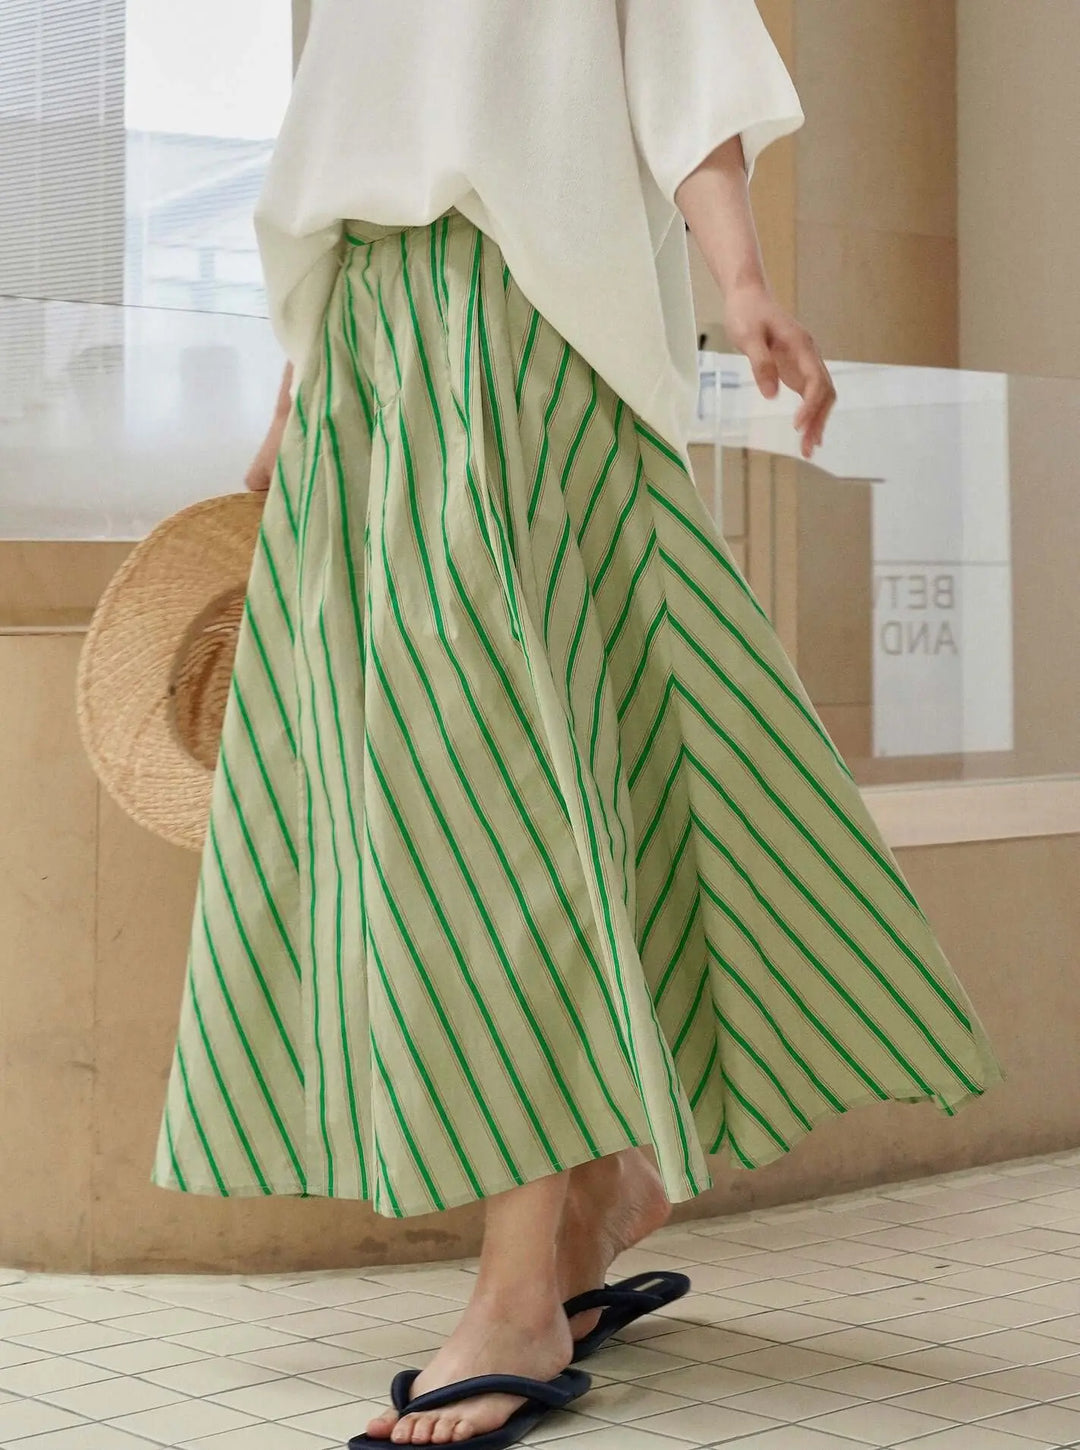 Green Striped Cotton A-line Maxi Skirt for Women's Summer
 
 This women's summer green striped maxi cotton a-line skirt is a must-have for your wardrobe. Made of comfortable cotton, this skirt is both stylish and versatileWomen's SkirtsThebesttailorThebesttailorsummer green striped maxi cottonThebesttailorsummer green striped maxi cotton